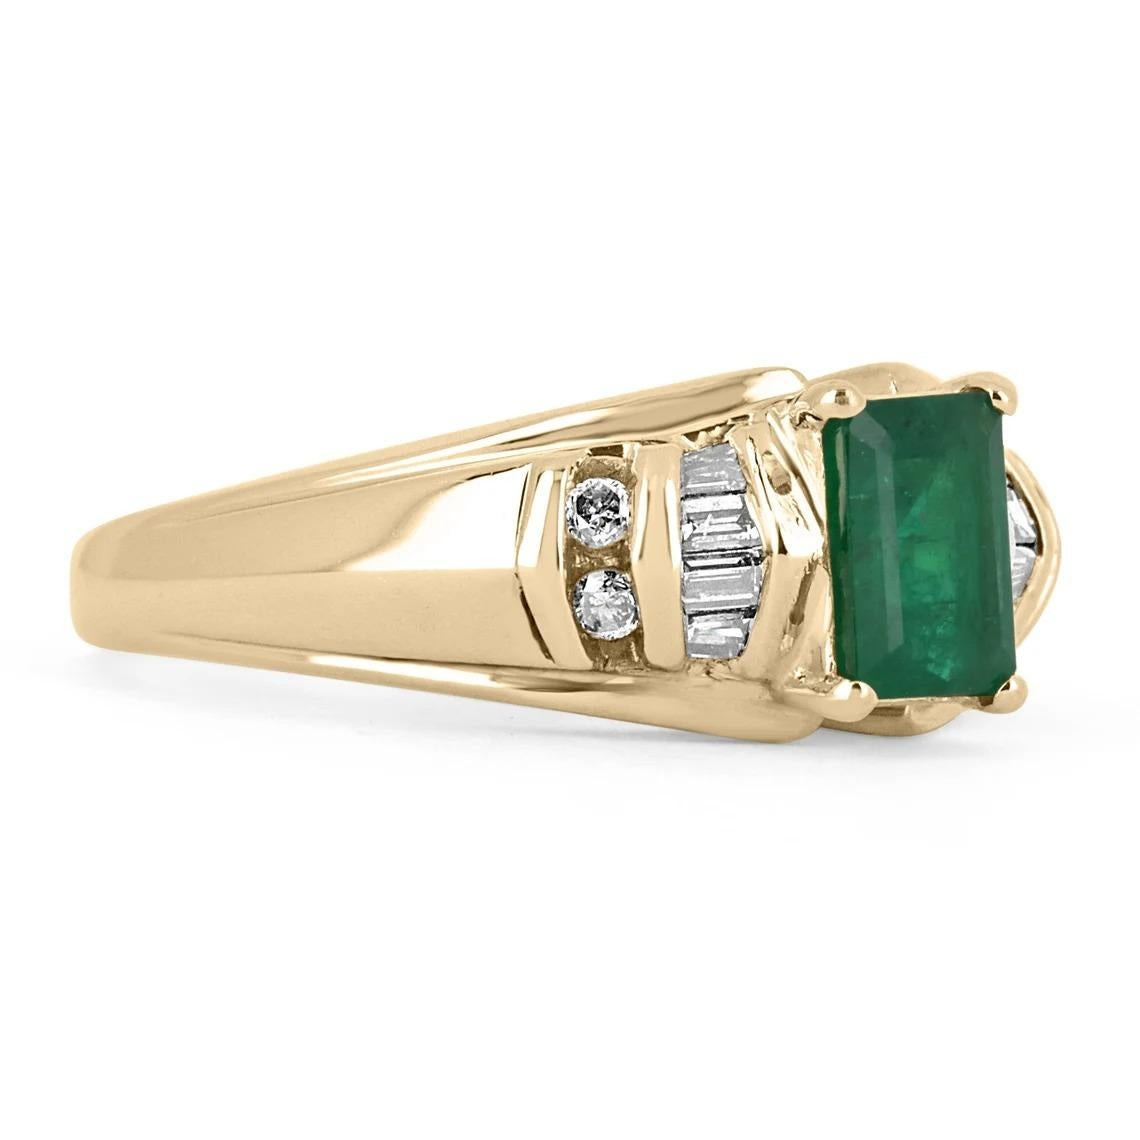 Setting Style: Solitaire with Accents
Setting Material: 14K Yellow Gold
Gold Weight: 5.2 Grams

Main Stone: Emerald
Shape: Emerald Cut
Weight: 0.96-Carats
Clarity: Translucent
Color: Dark Green
Luster: Very Good
Origin: Colombia
Treatments: Natural,